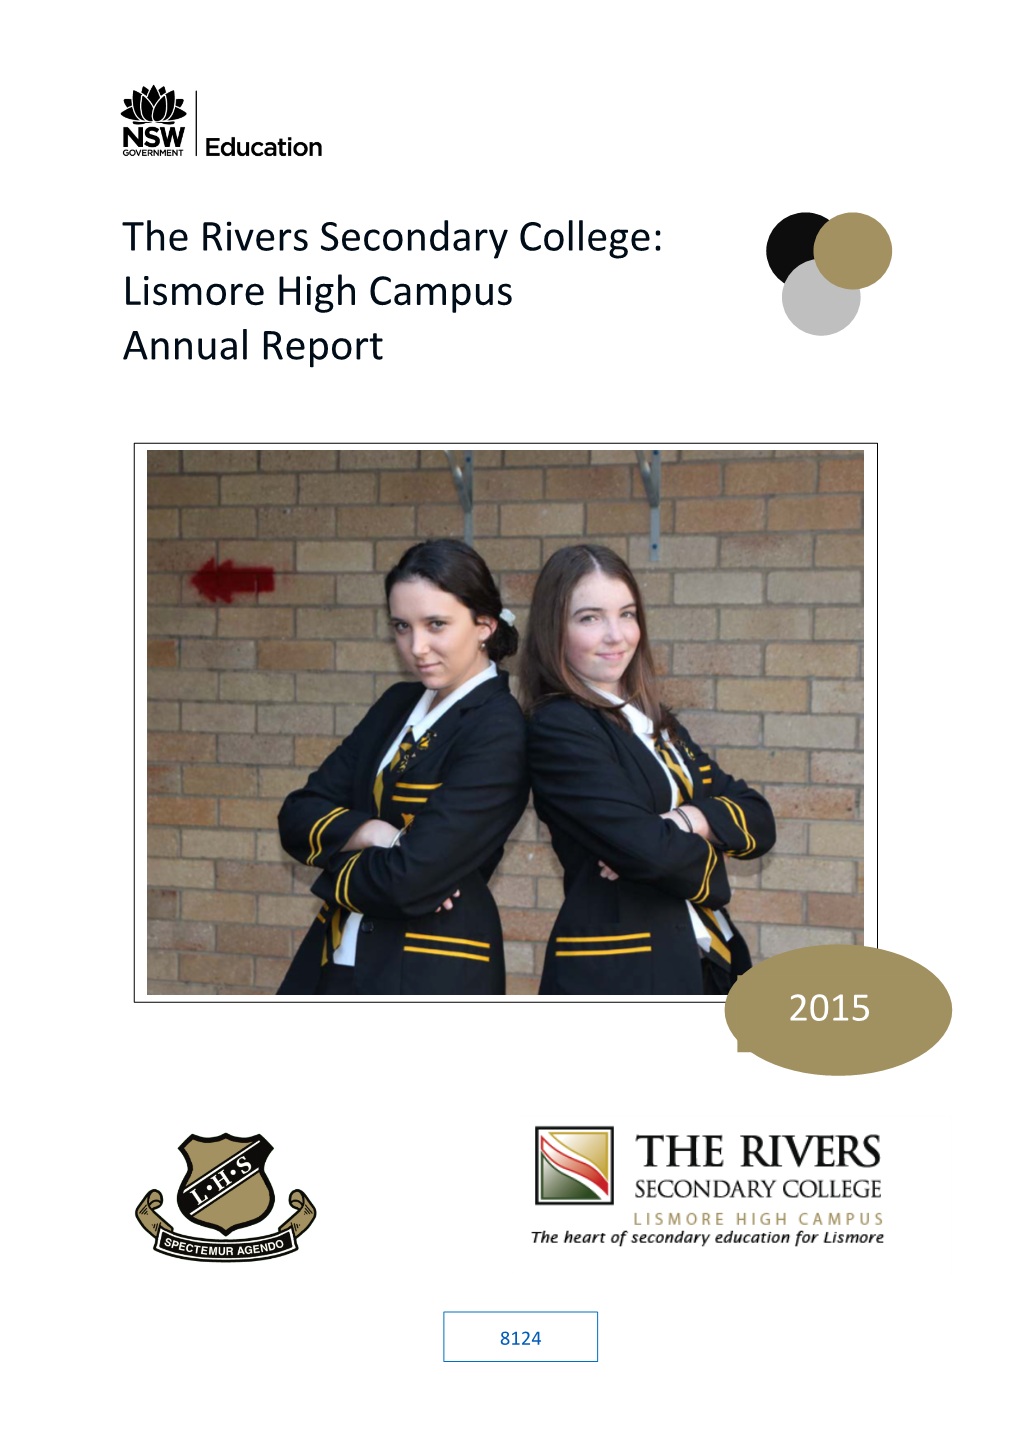 The Rivers Secondary College: Lismore High Campus Annual Report